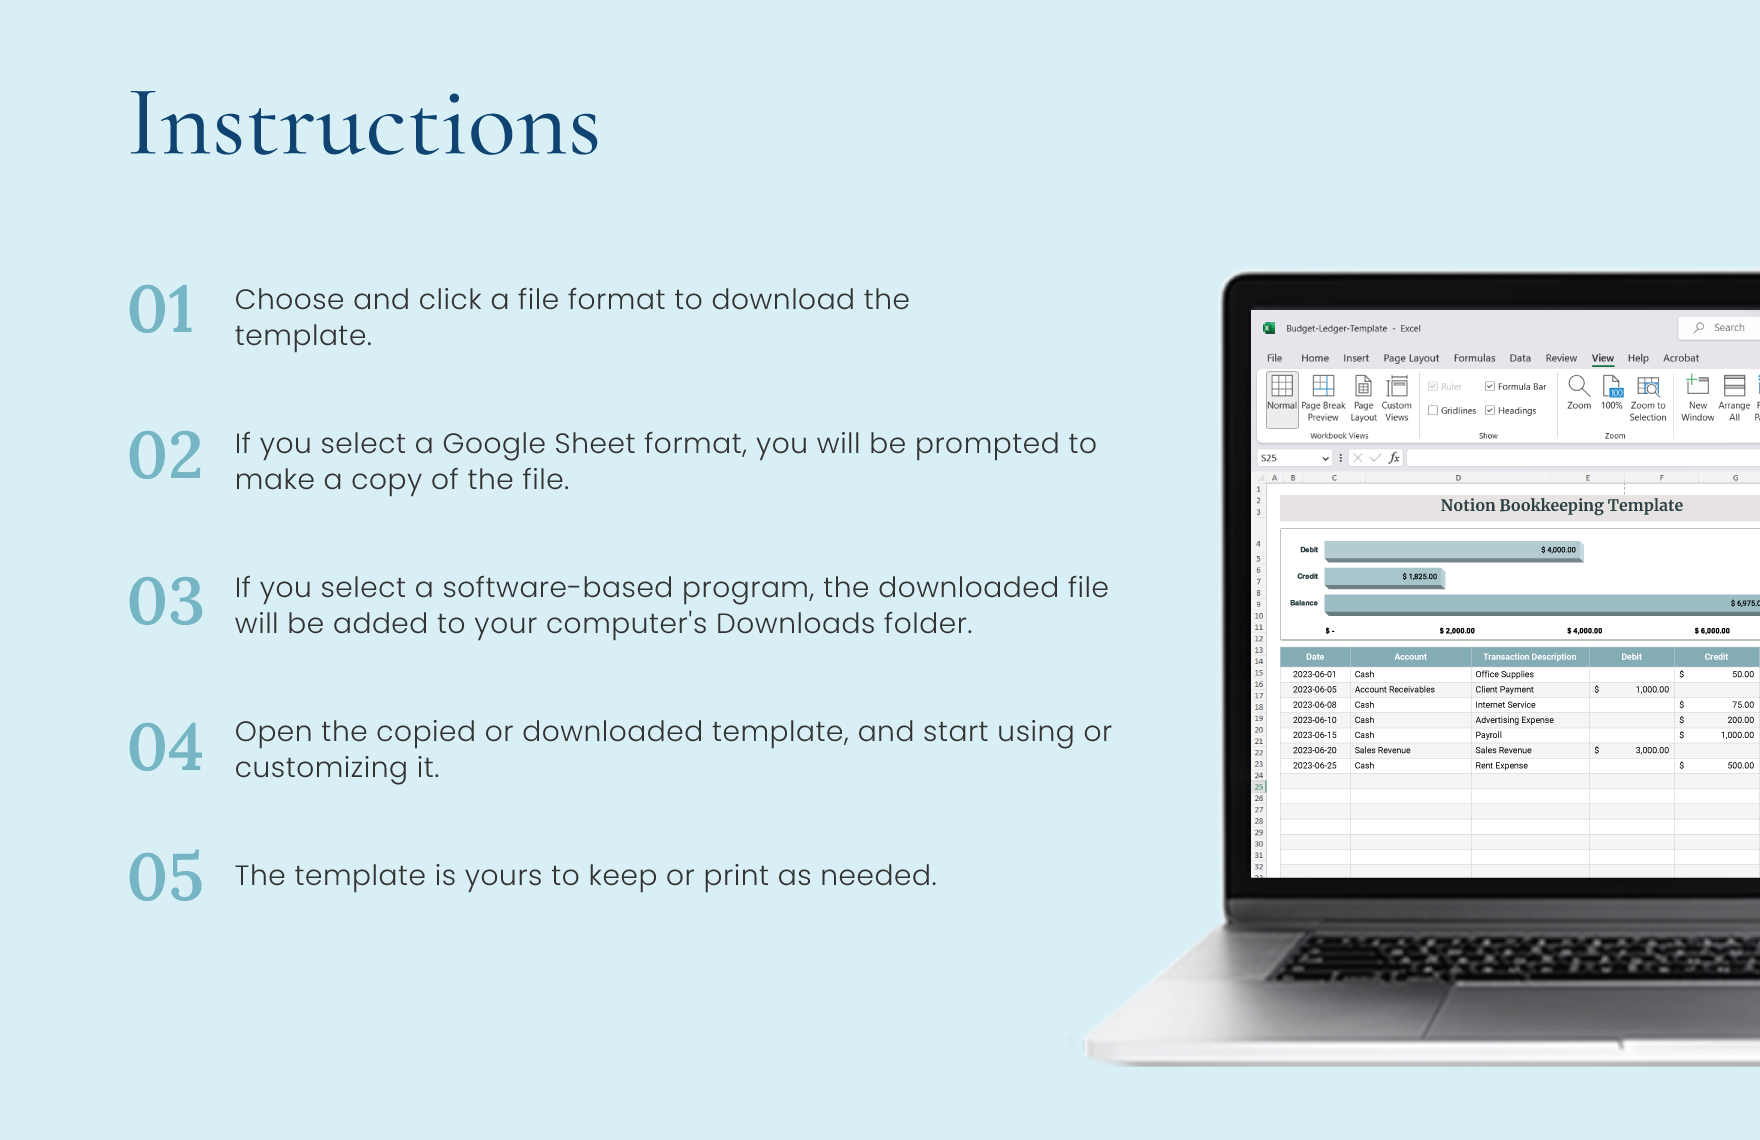 Notion Bookkeeping Template